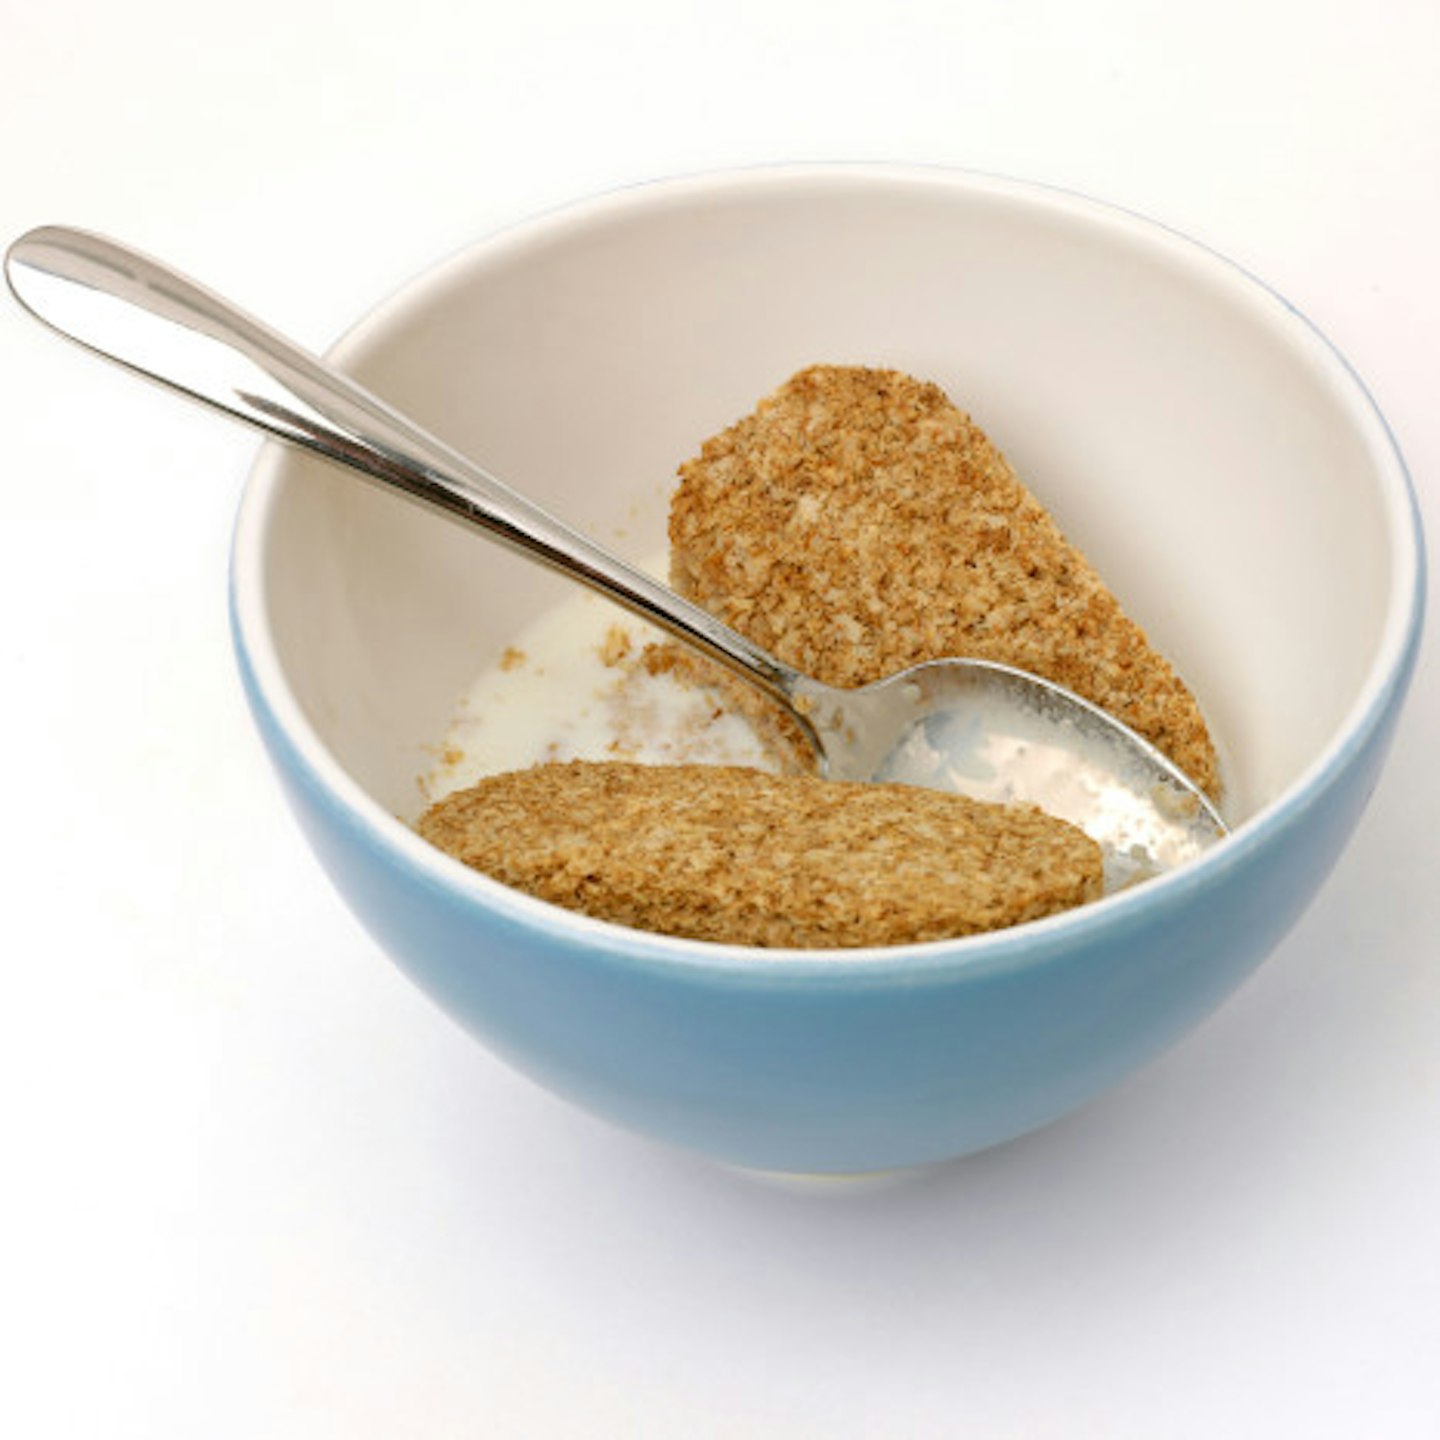 Weetabix are packed with fibre